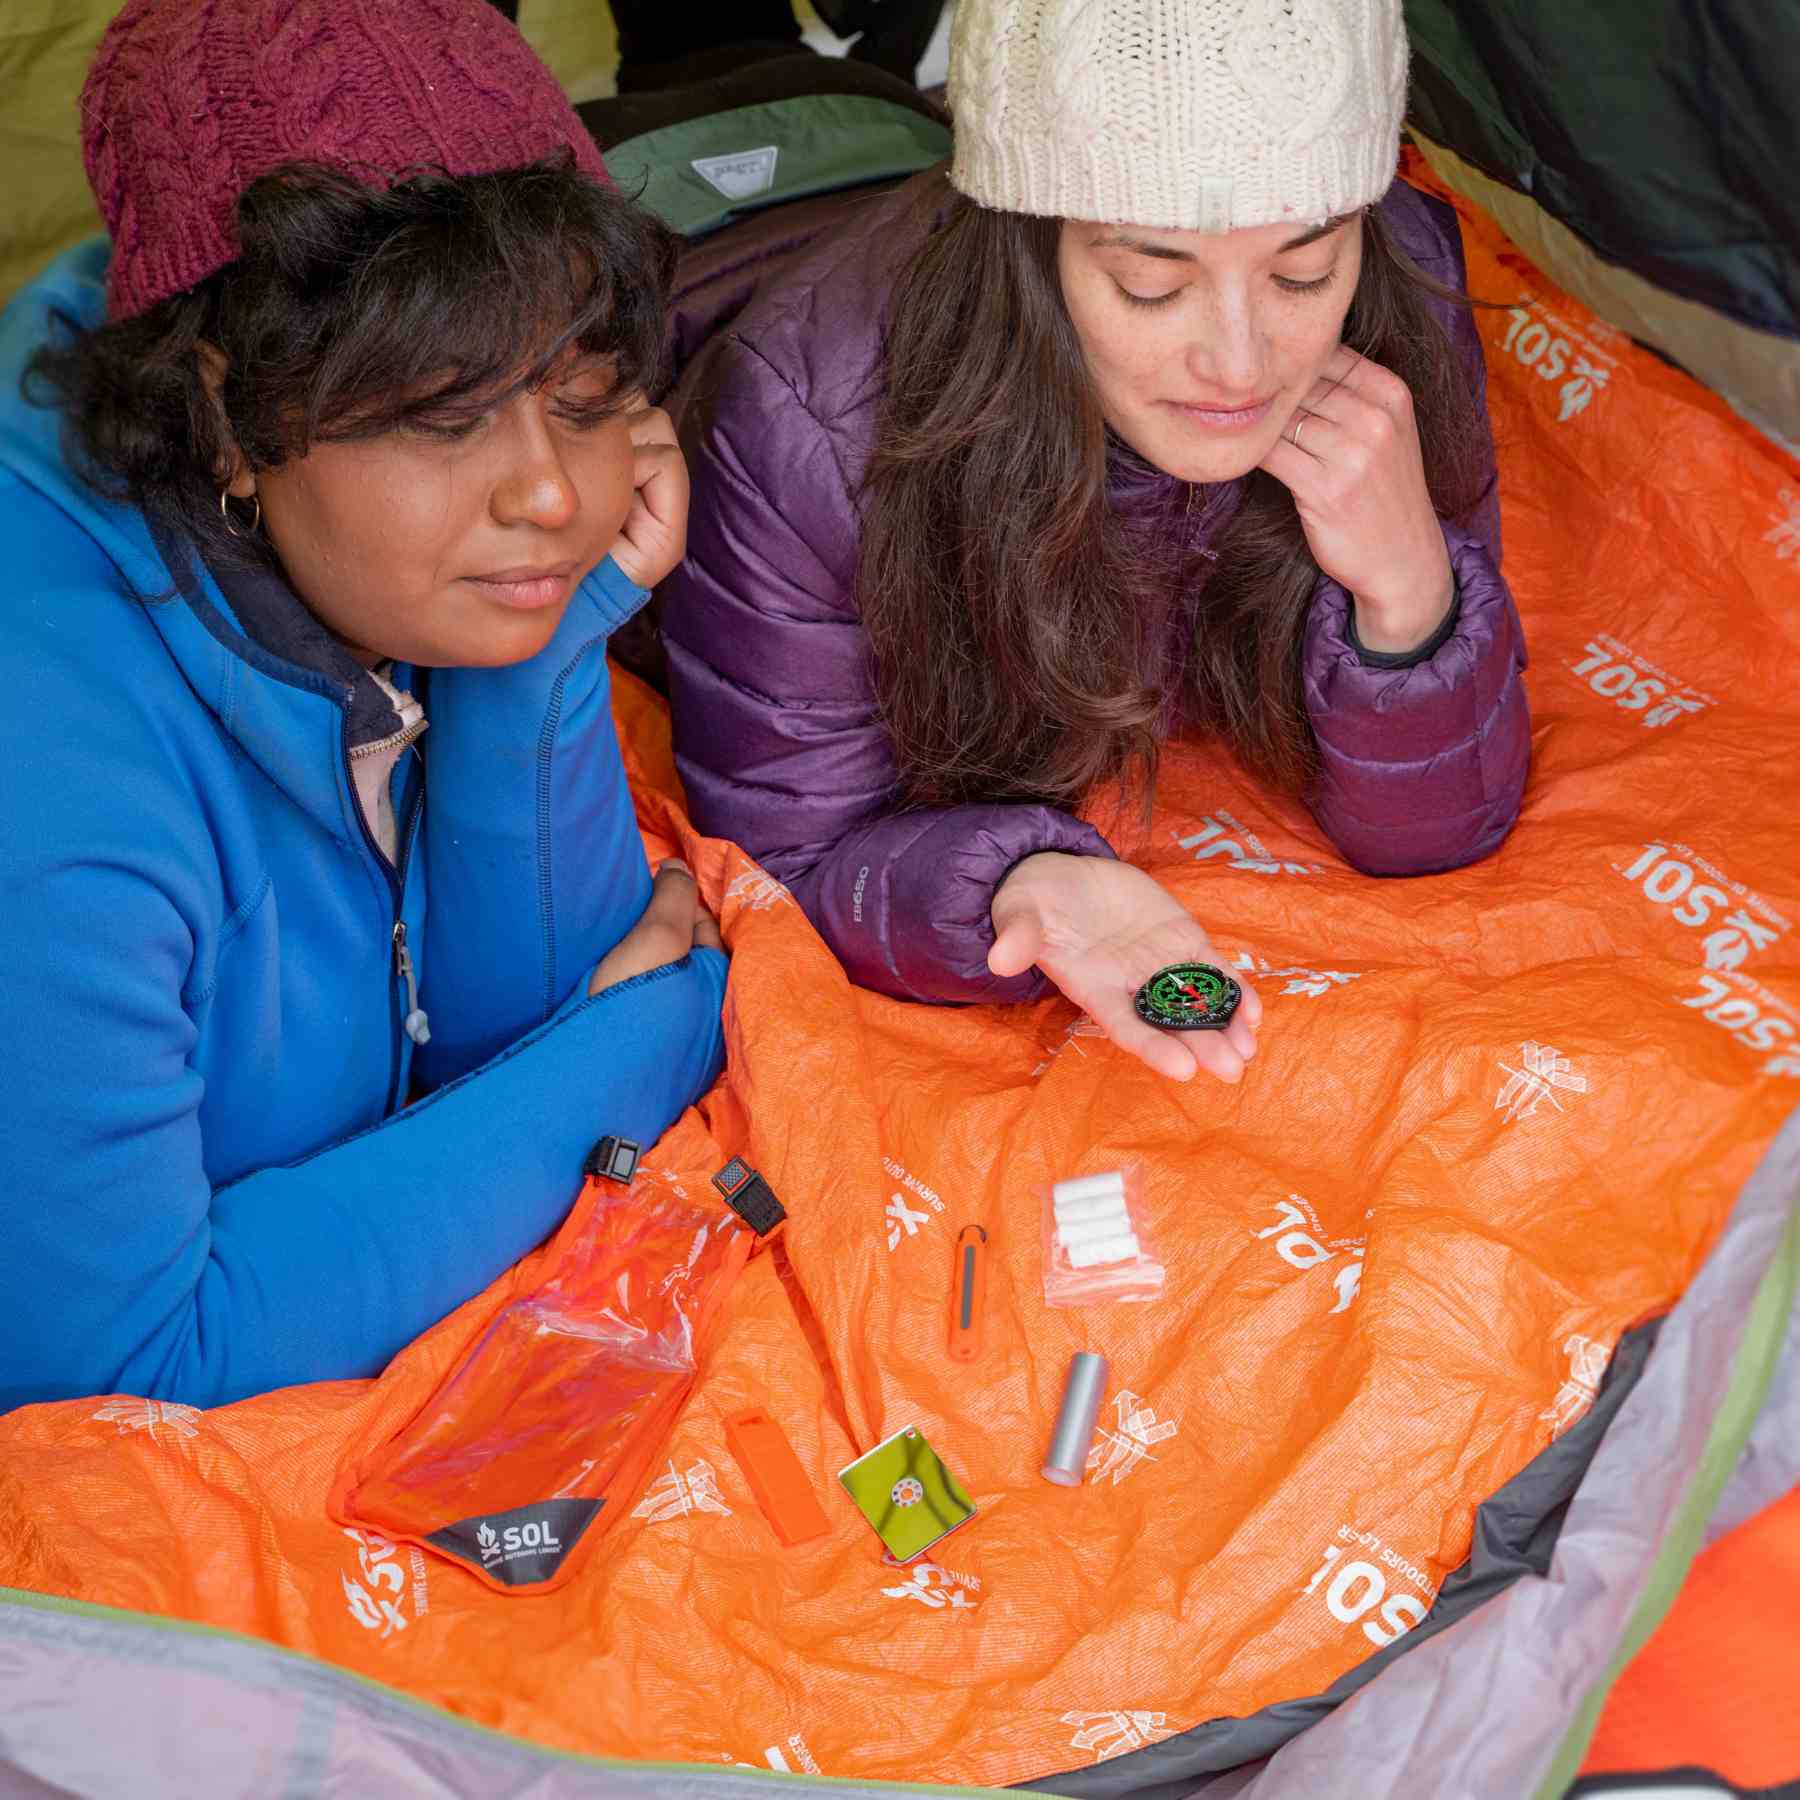 Scout Survival Kit two women inspecting contents of kit laying on orange SOL blanket